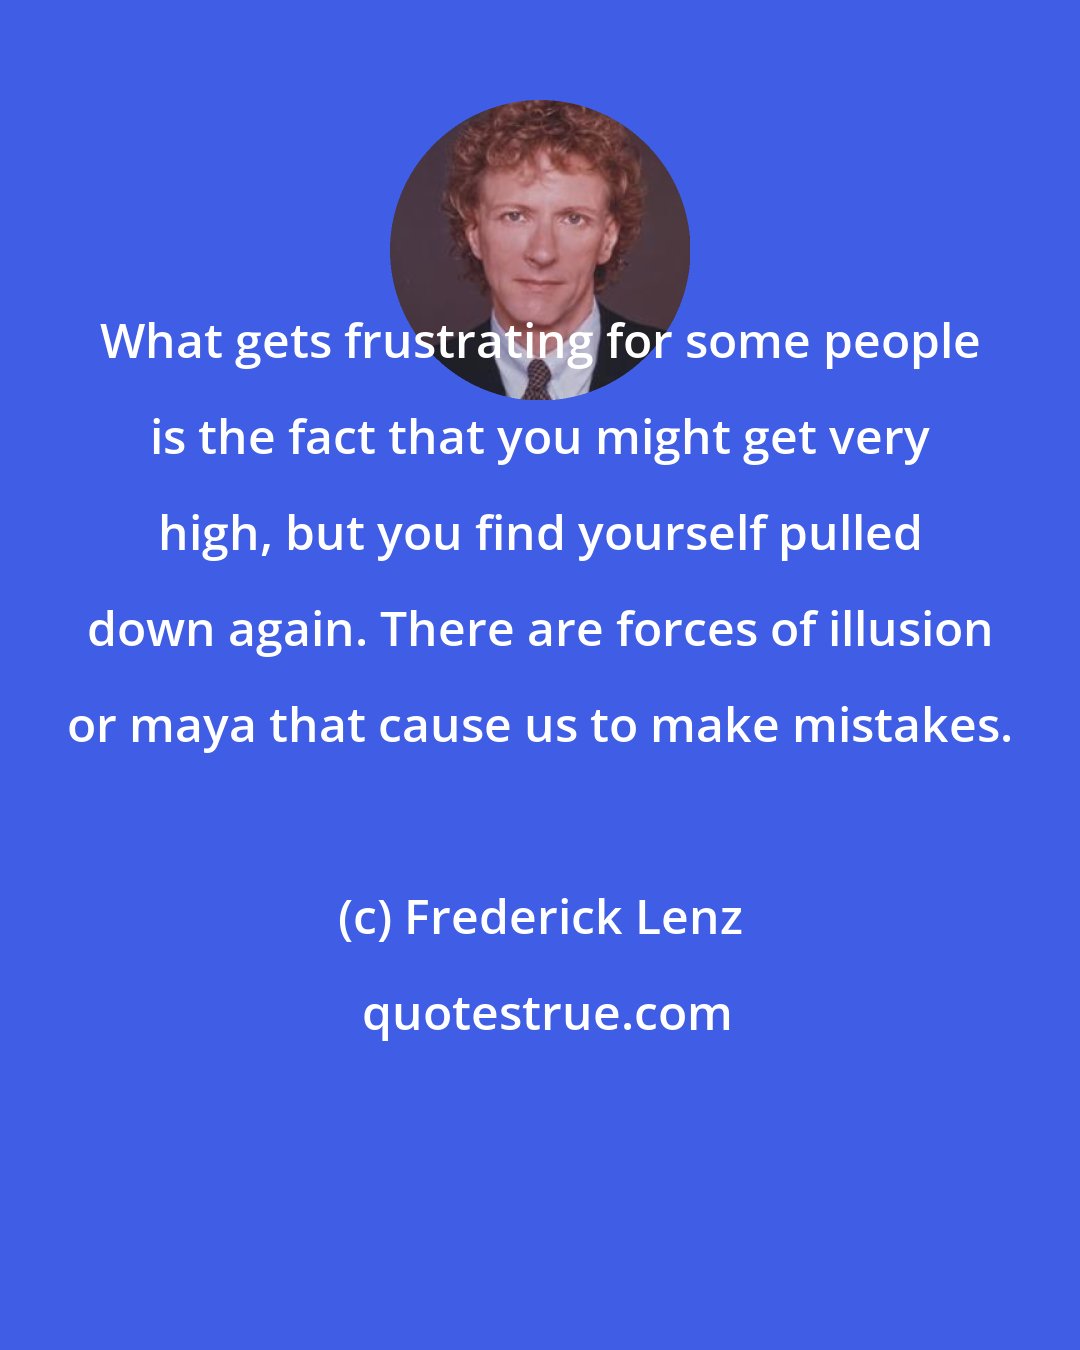 Frederick Lenz: What gets frustrating for some people is the fact that you might get very high, but you find yourself pulled down again. There are forces of illusion or maya that cause us to make mistakes.